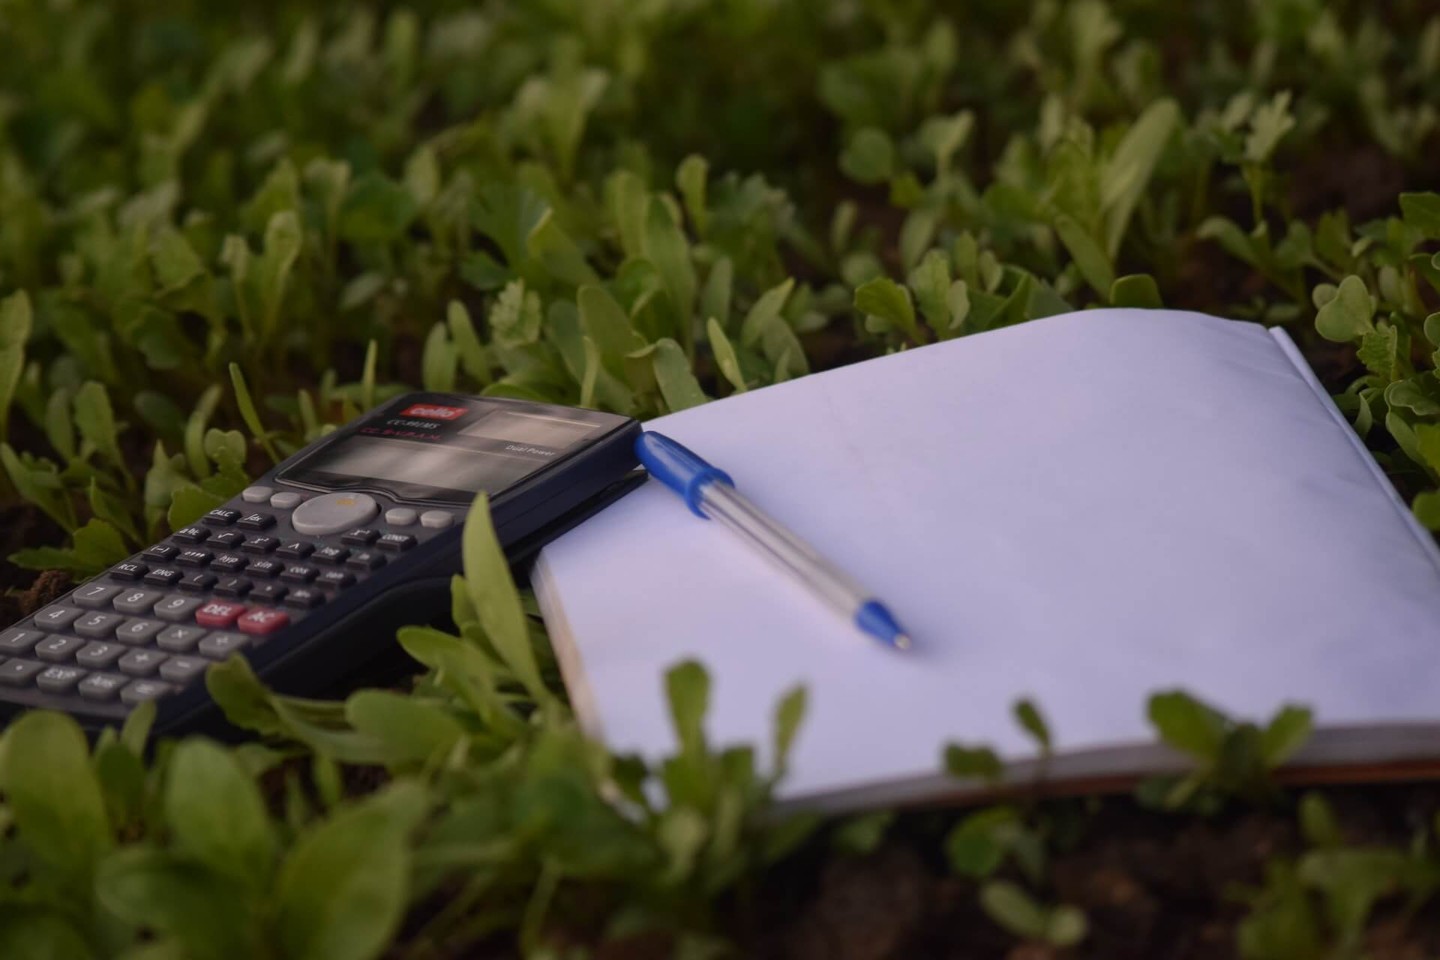 Calculator and notepad surrounded by leaves